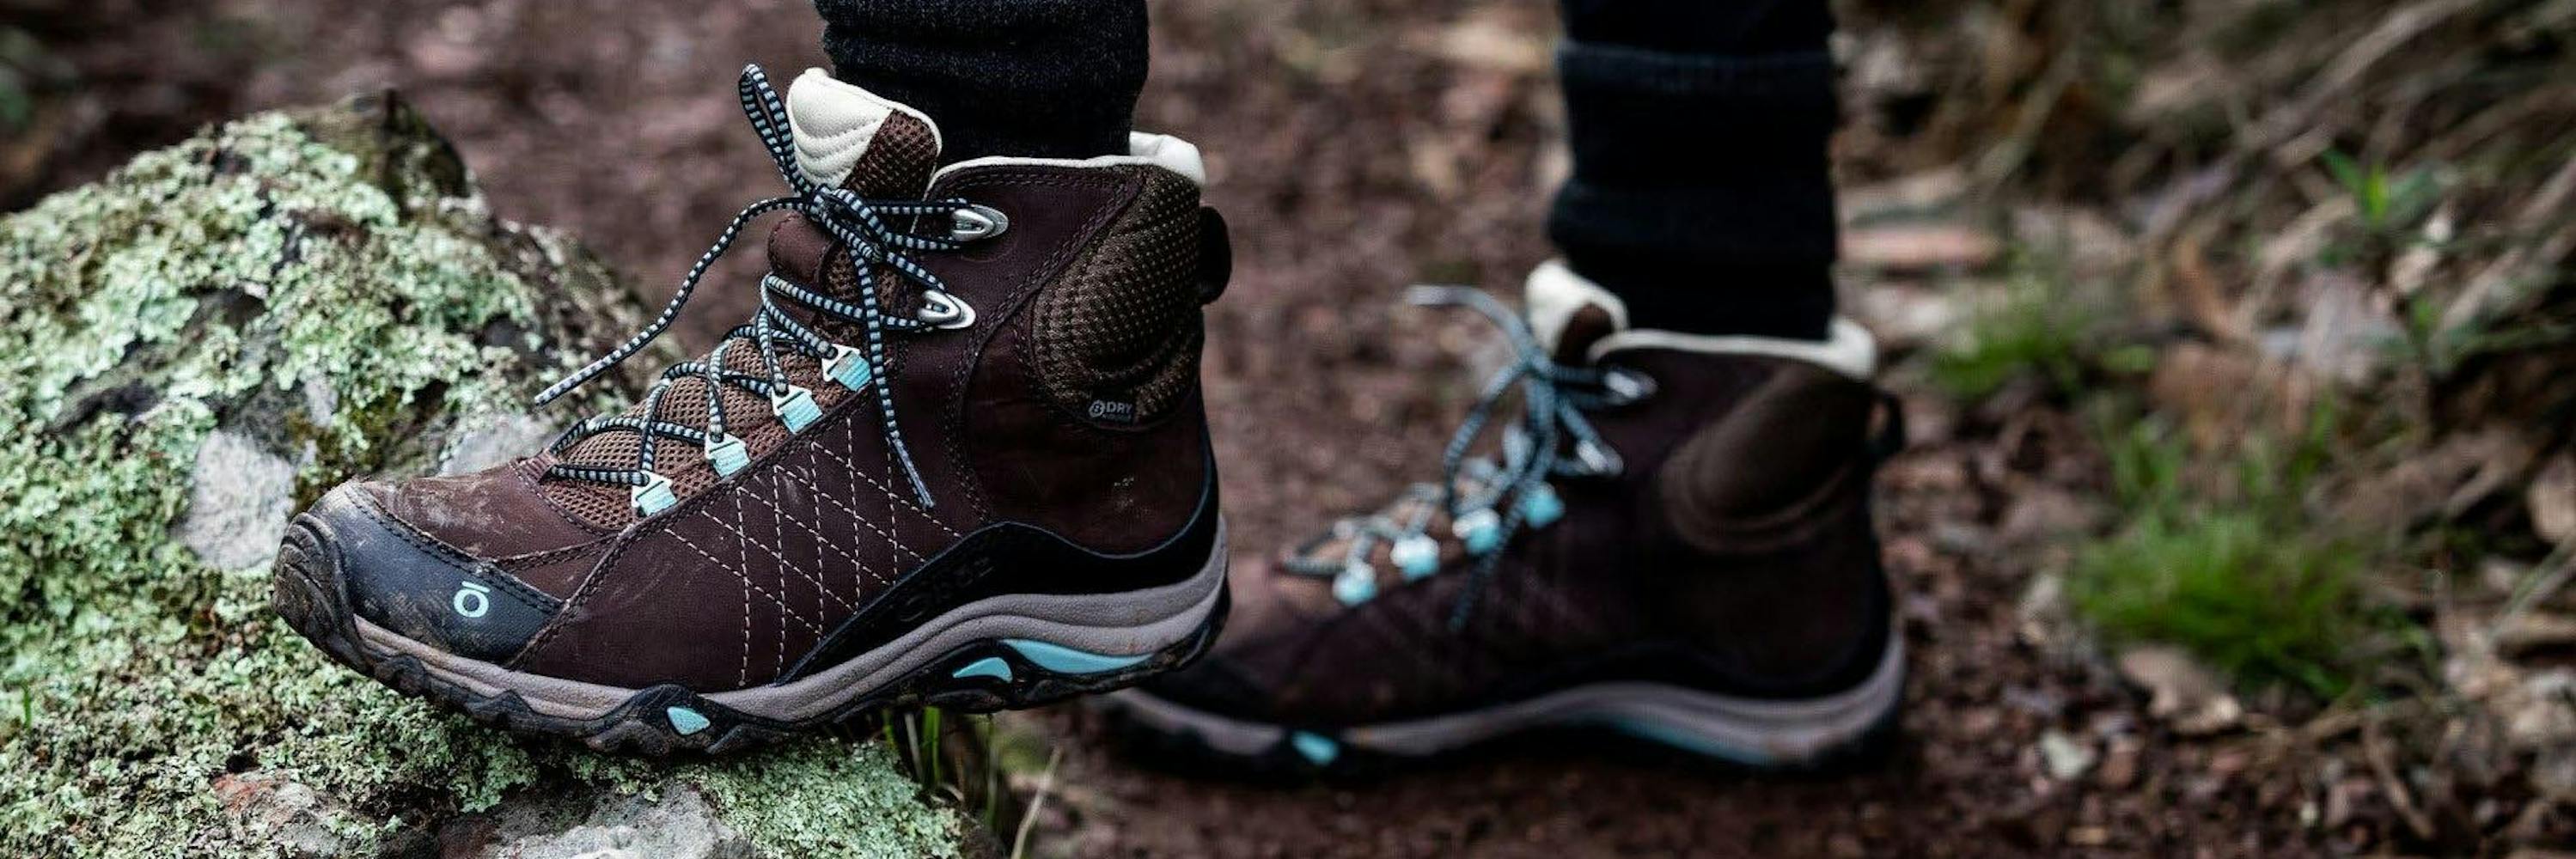 How to Choose the Right Hiking Boots & Trail Shoes